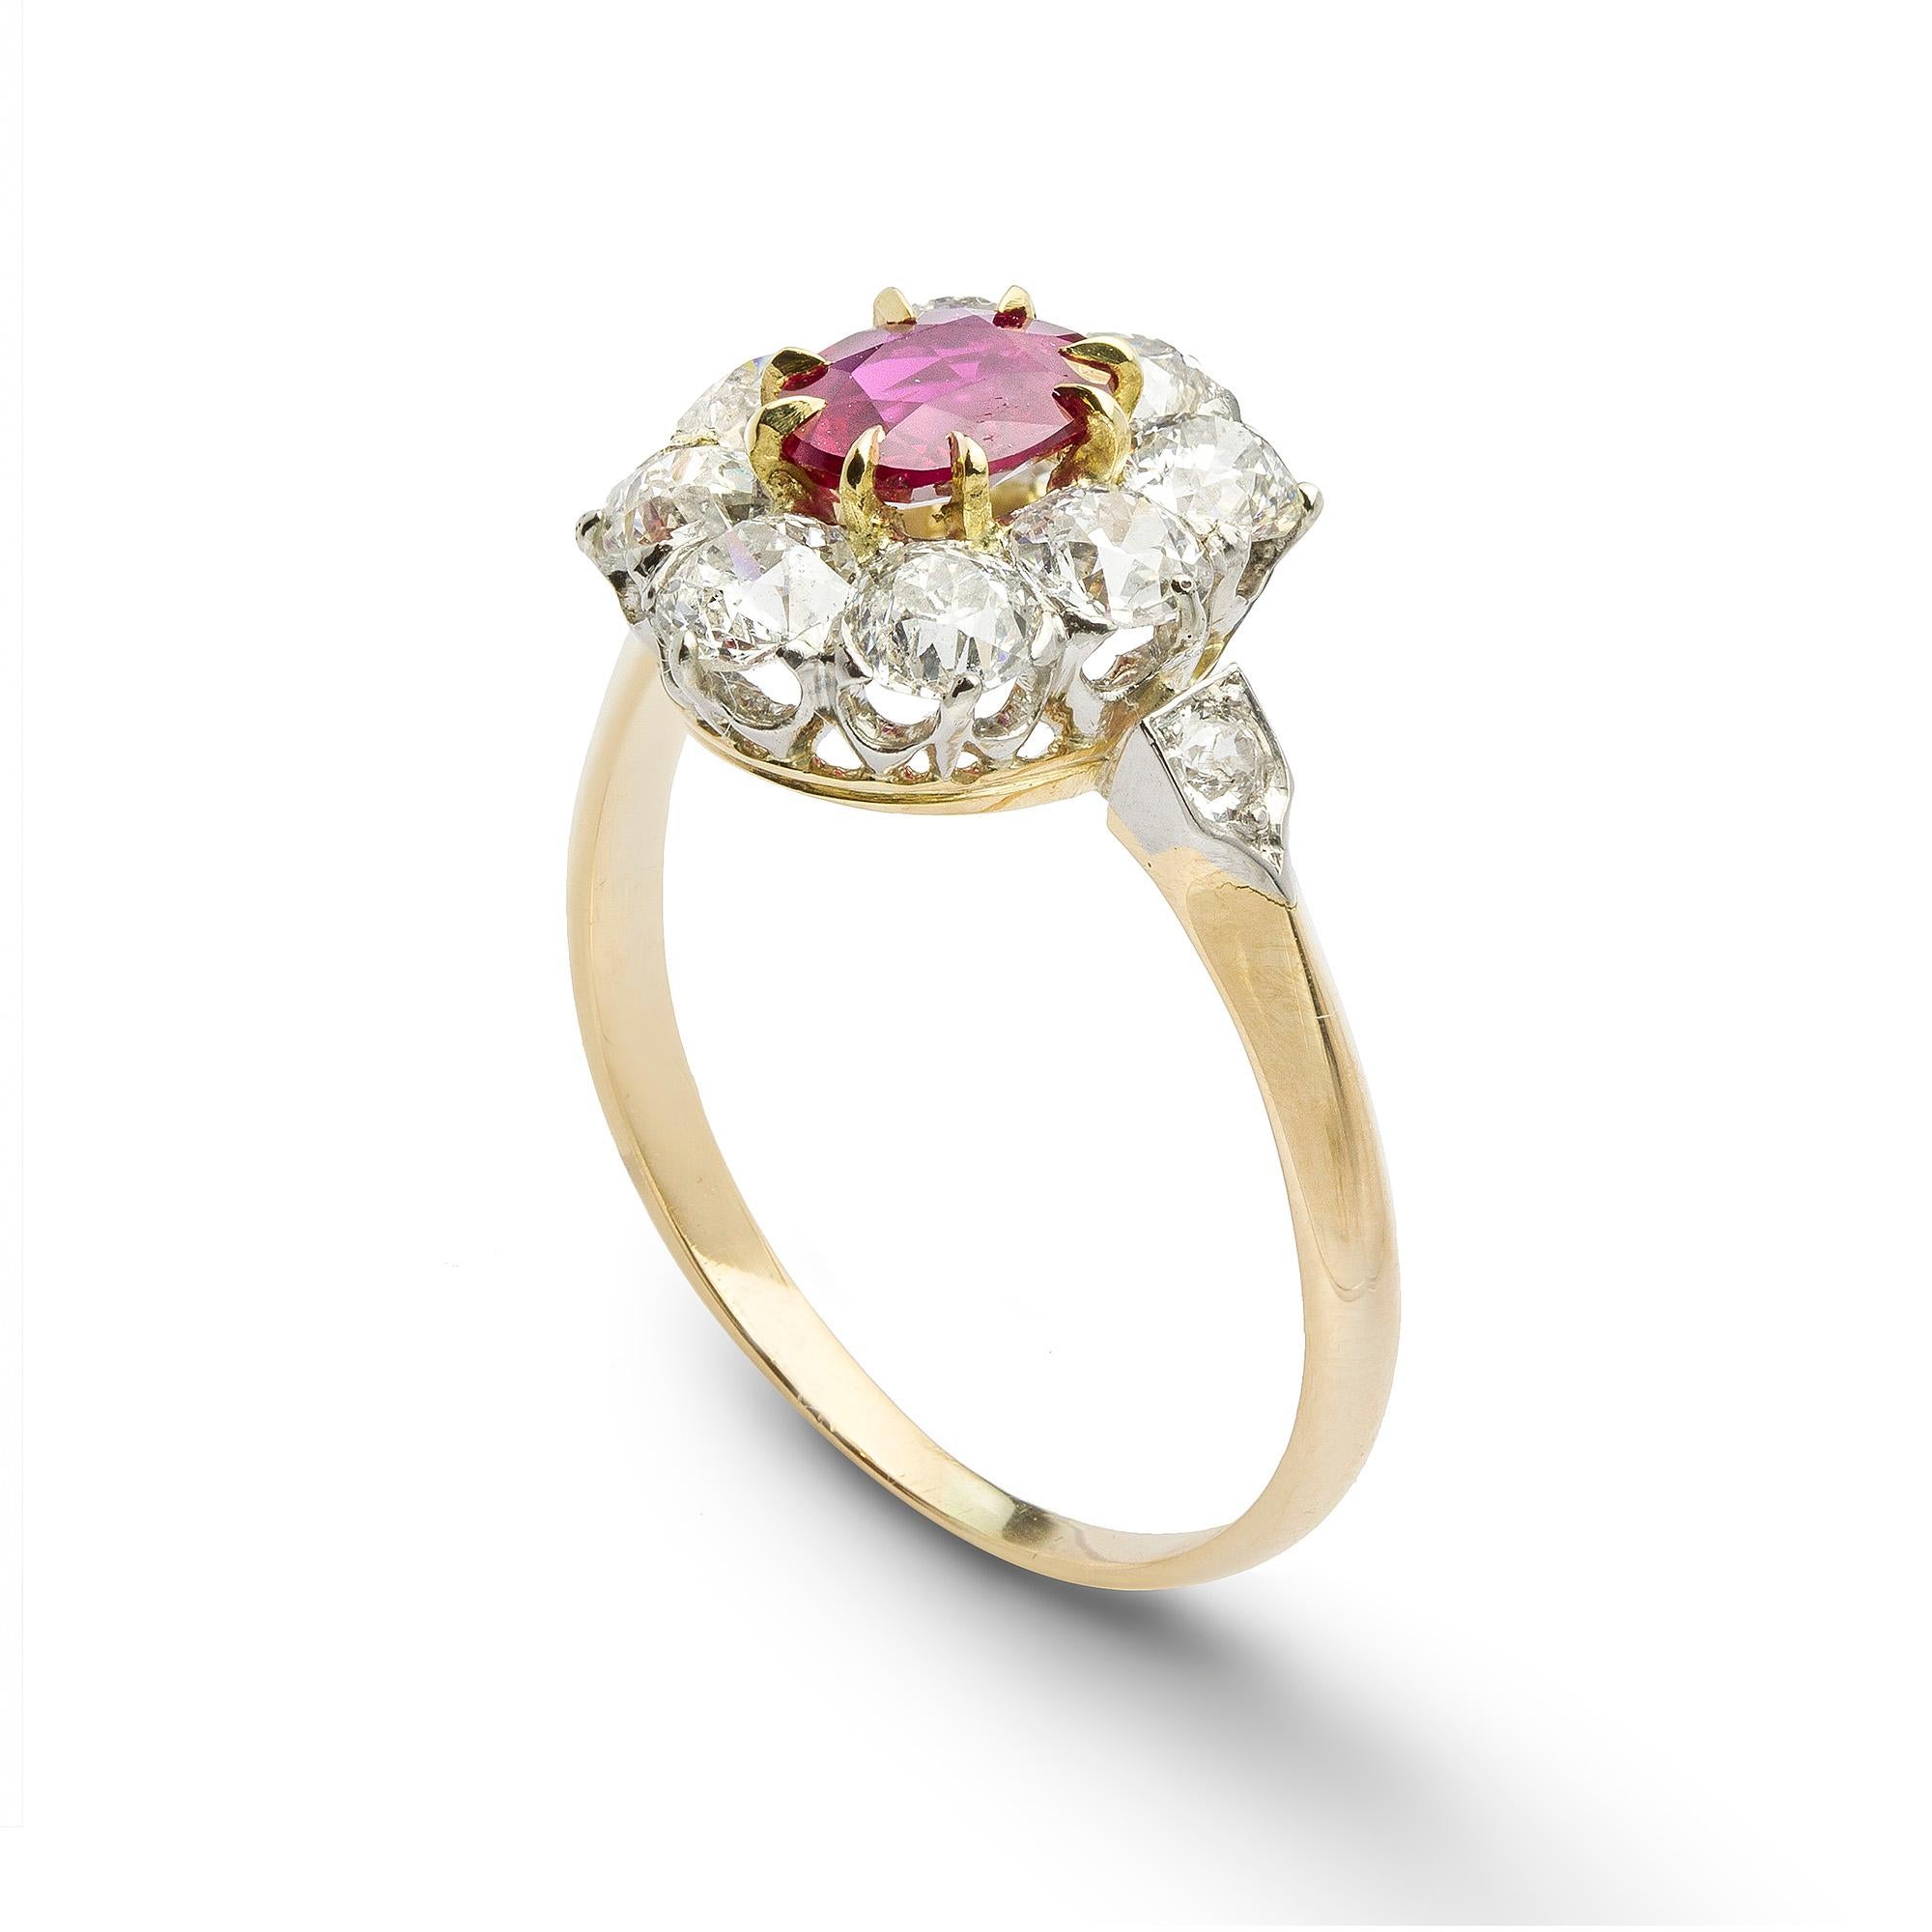 A ruby and diamond cluster ring, the oval faceted ruby estimated to weigh 0.65 carats, surrounded by eight old brilliant-cut diamonds estimated to weigh 1.35 carats in total, all claw set in a white to yellow gold mount with diamond set